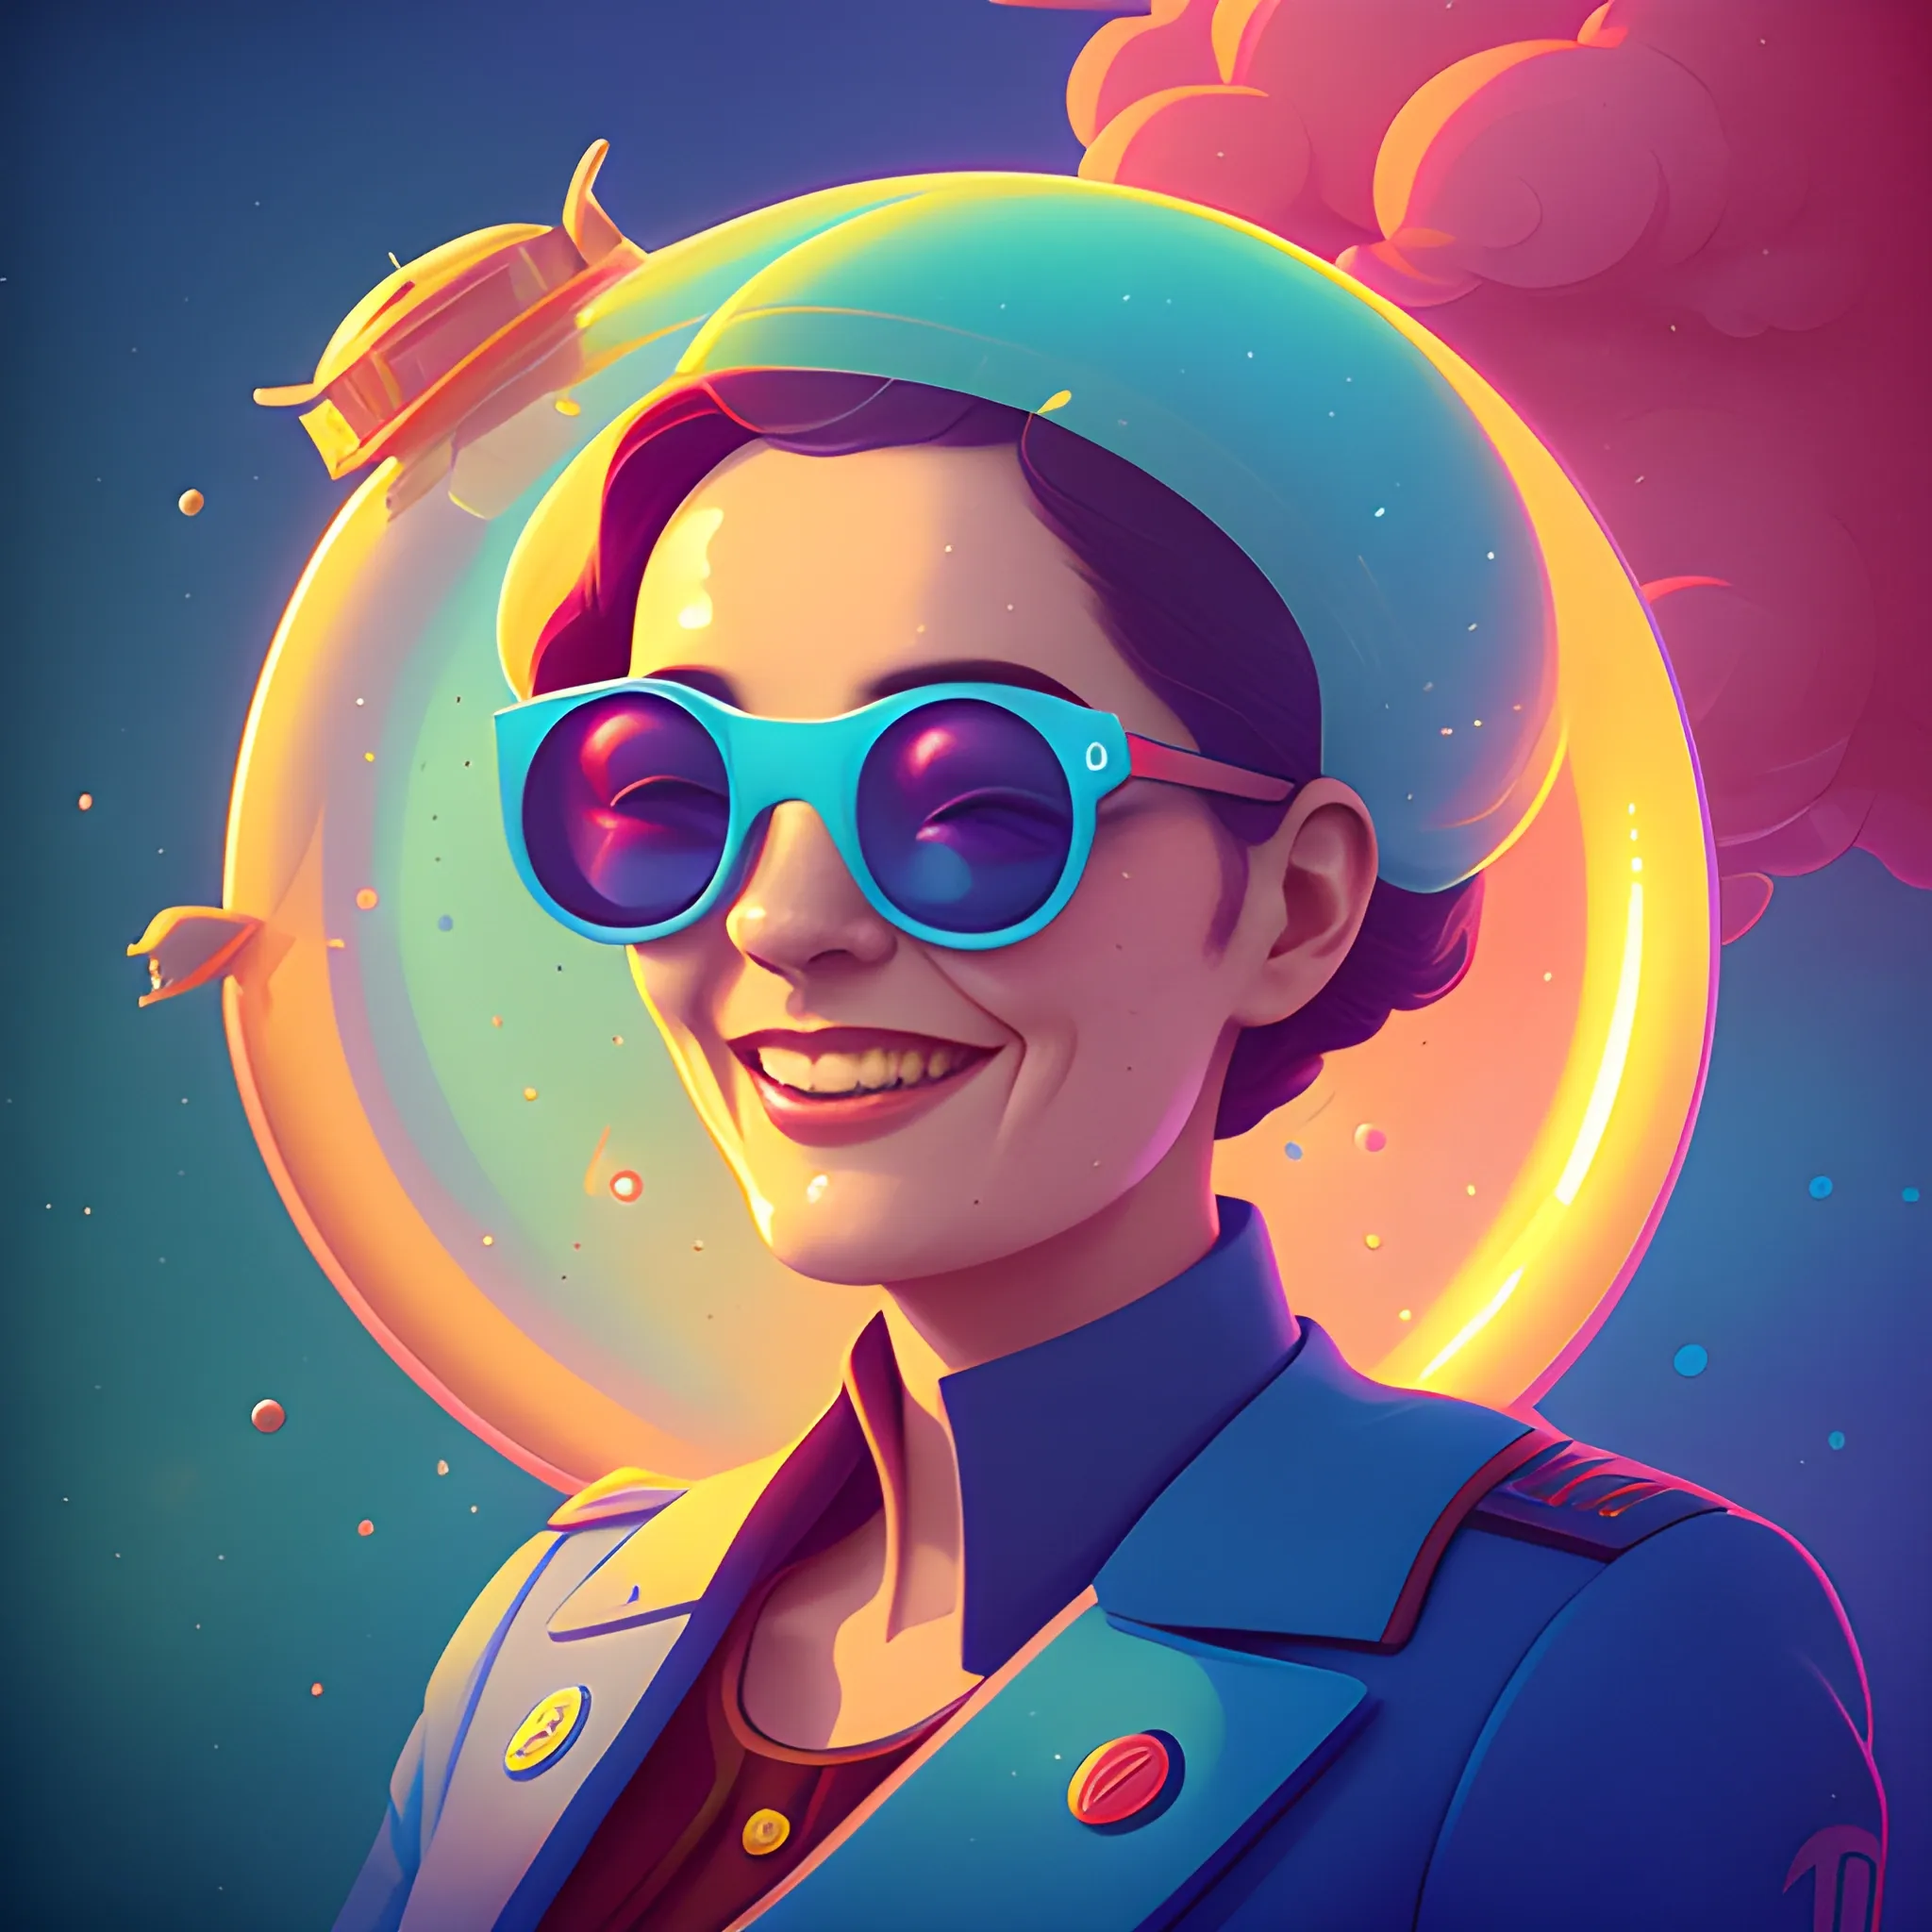 Friendly wise female government workiner. Should be warm, cheerful, knowledgeable, and smiling. by petros afshar, ross tran, Tom Bagshaw, tom whalen, underwater bubbly psychedelic clouds, Anaglyph 3D lens blur effect
